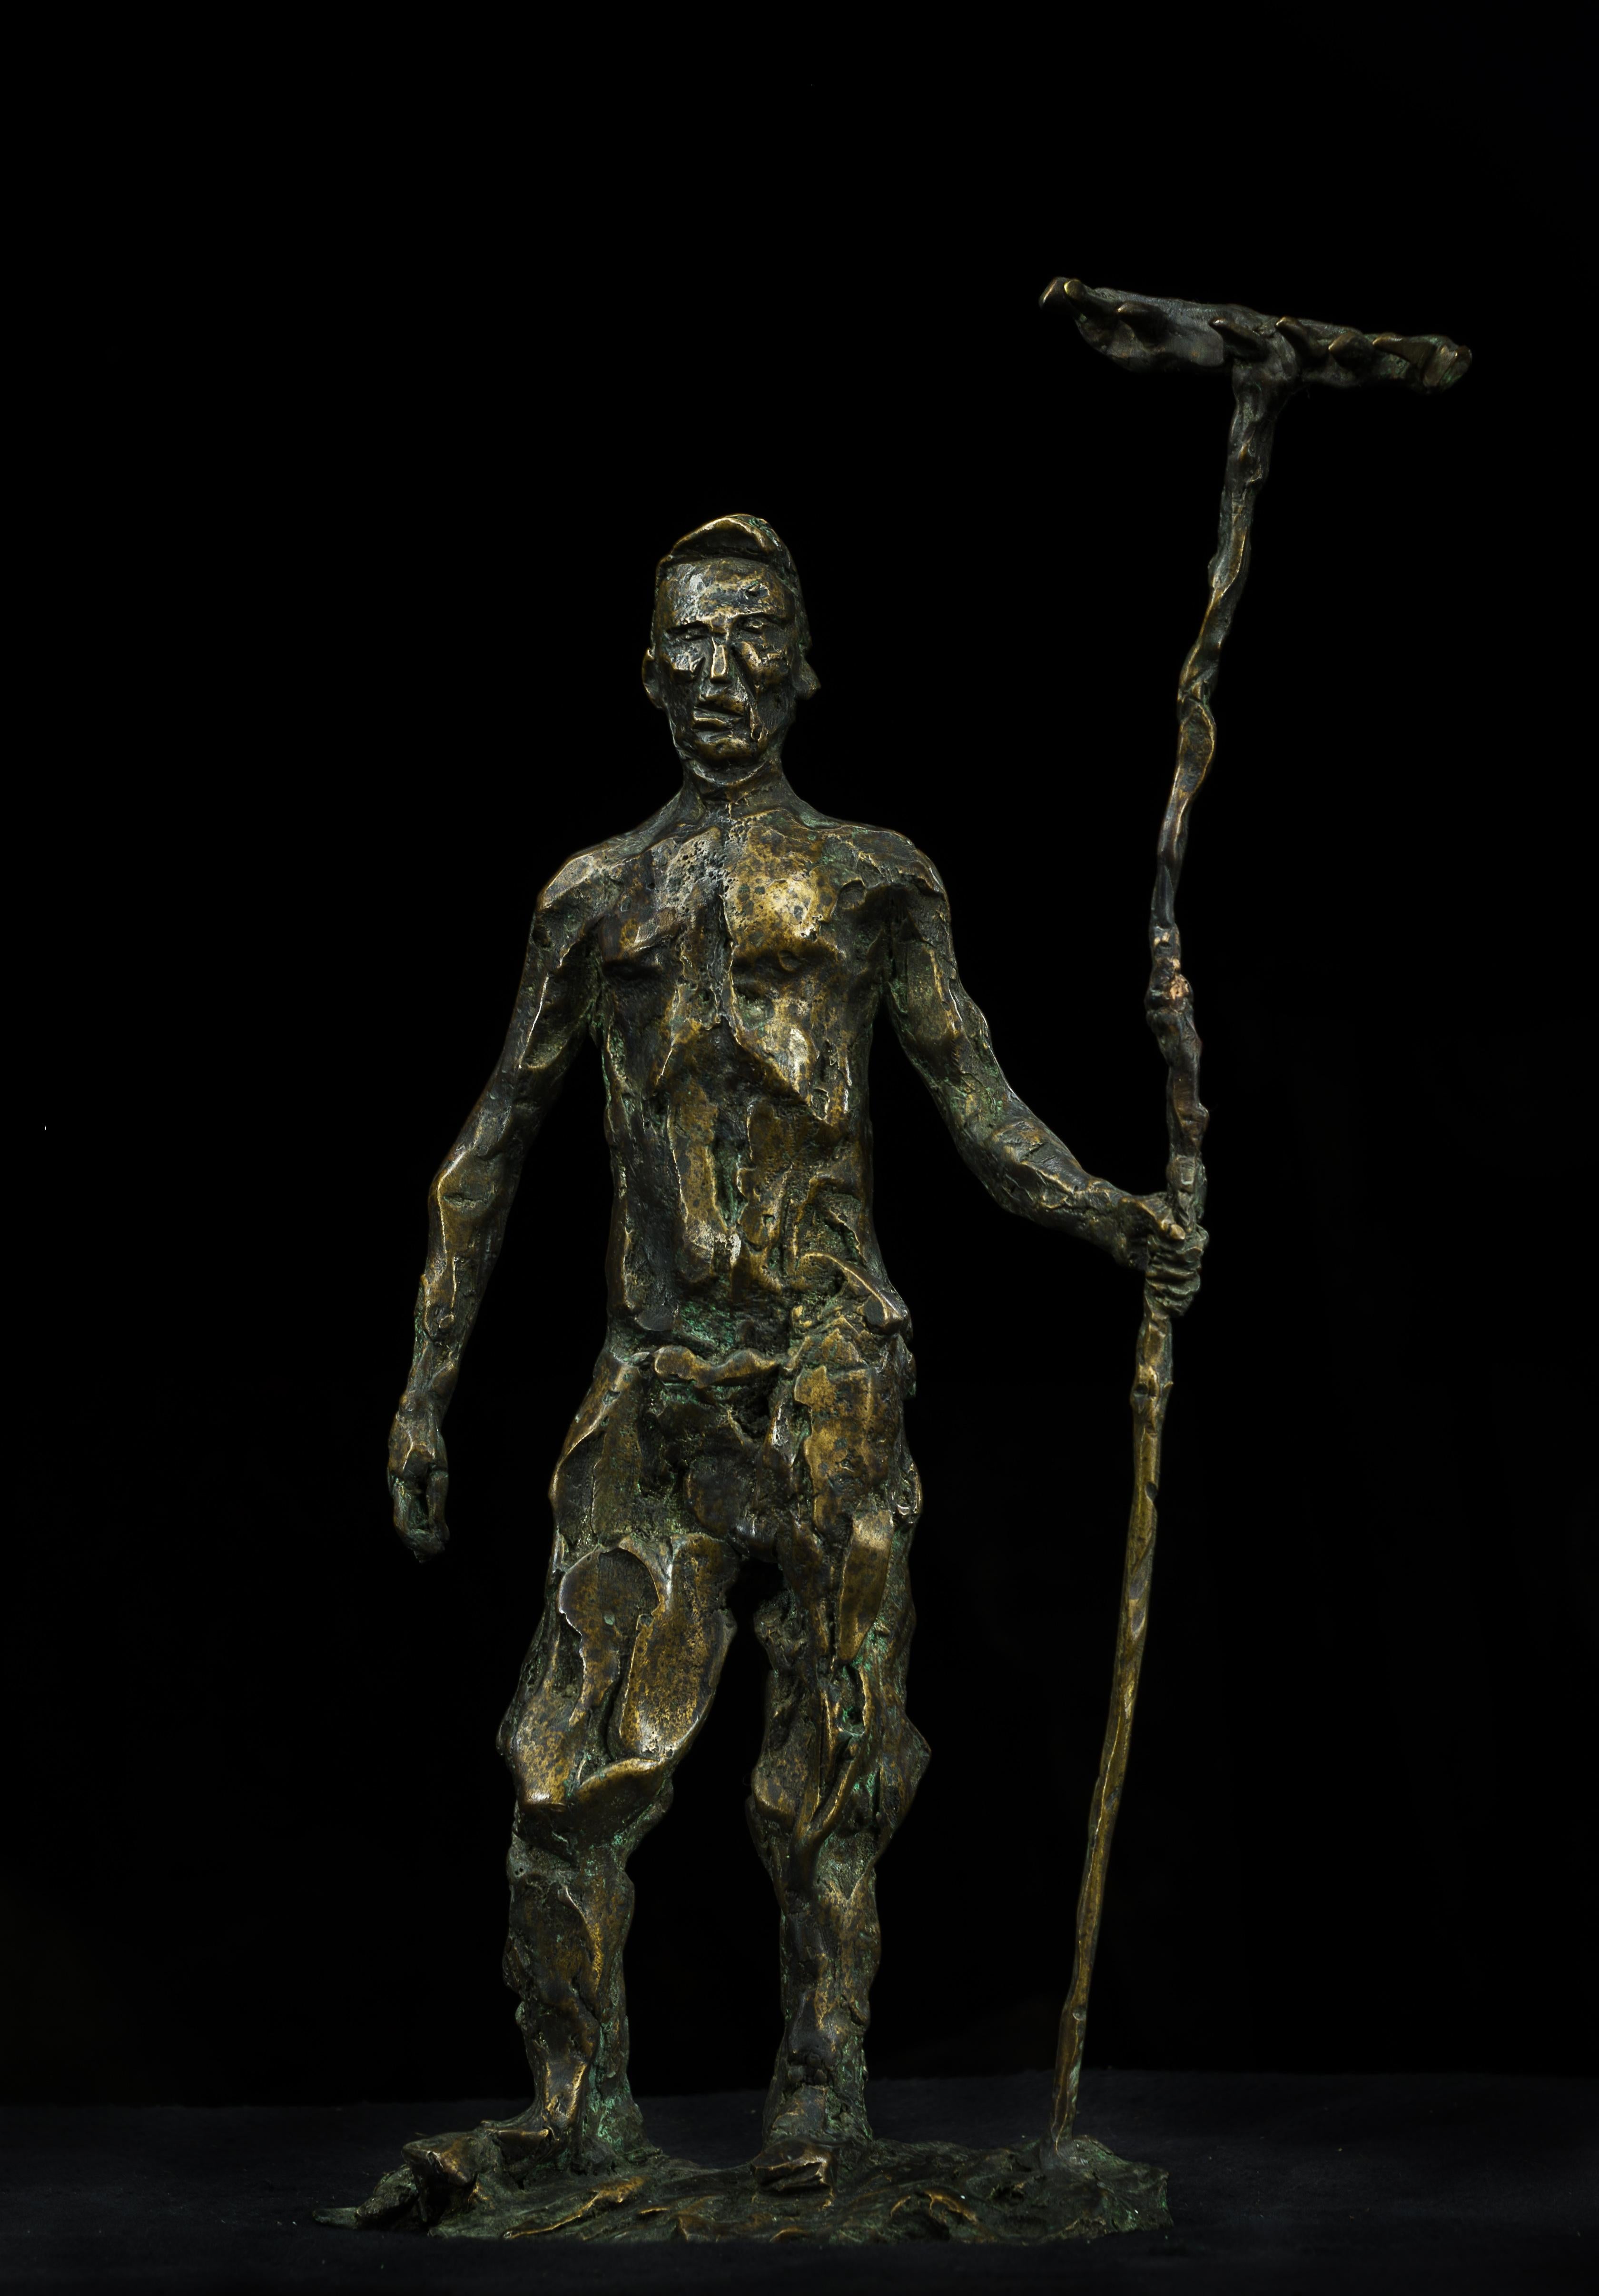 Alexander Sviyazov Figurative Sculpture - Russian Contemporary Sculpture by A. Sviyazov - The Man with the Rake, Hayfield